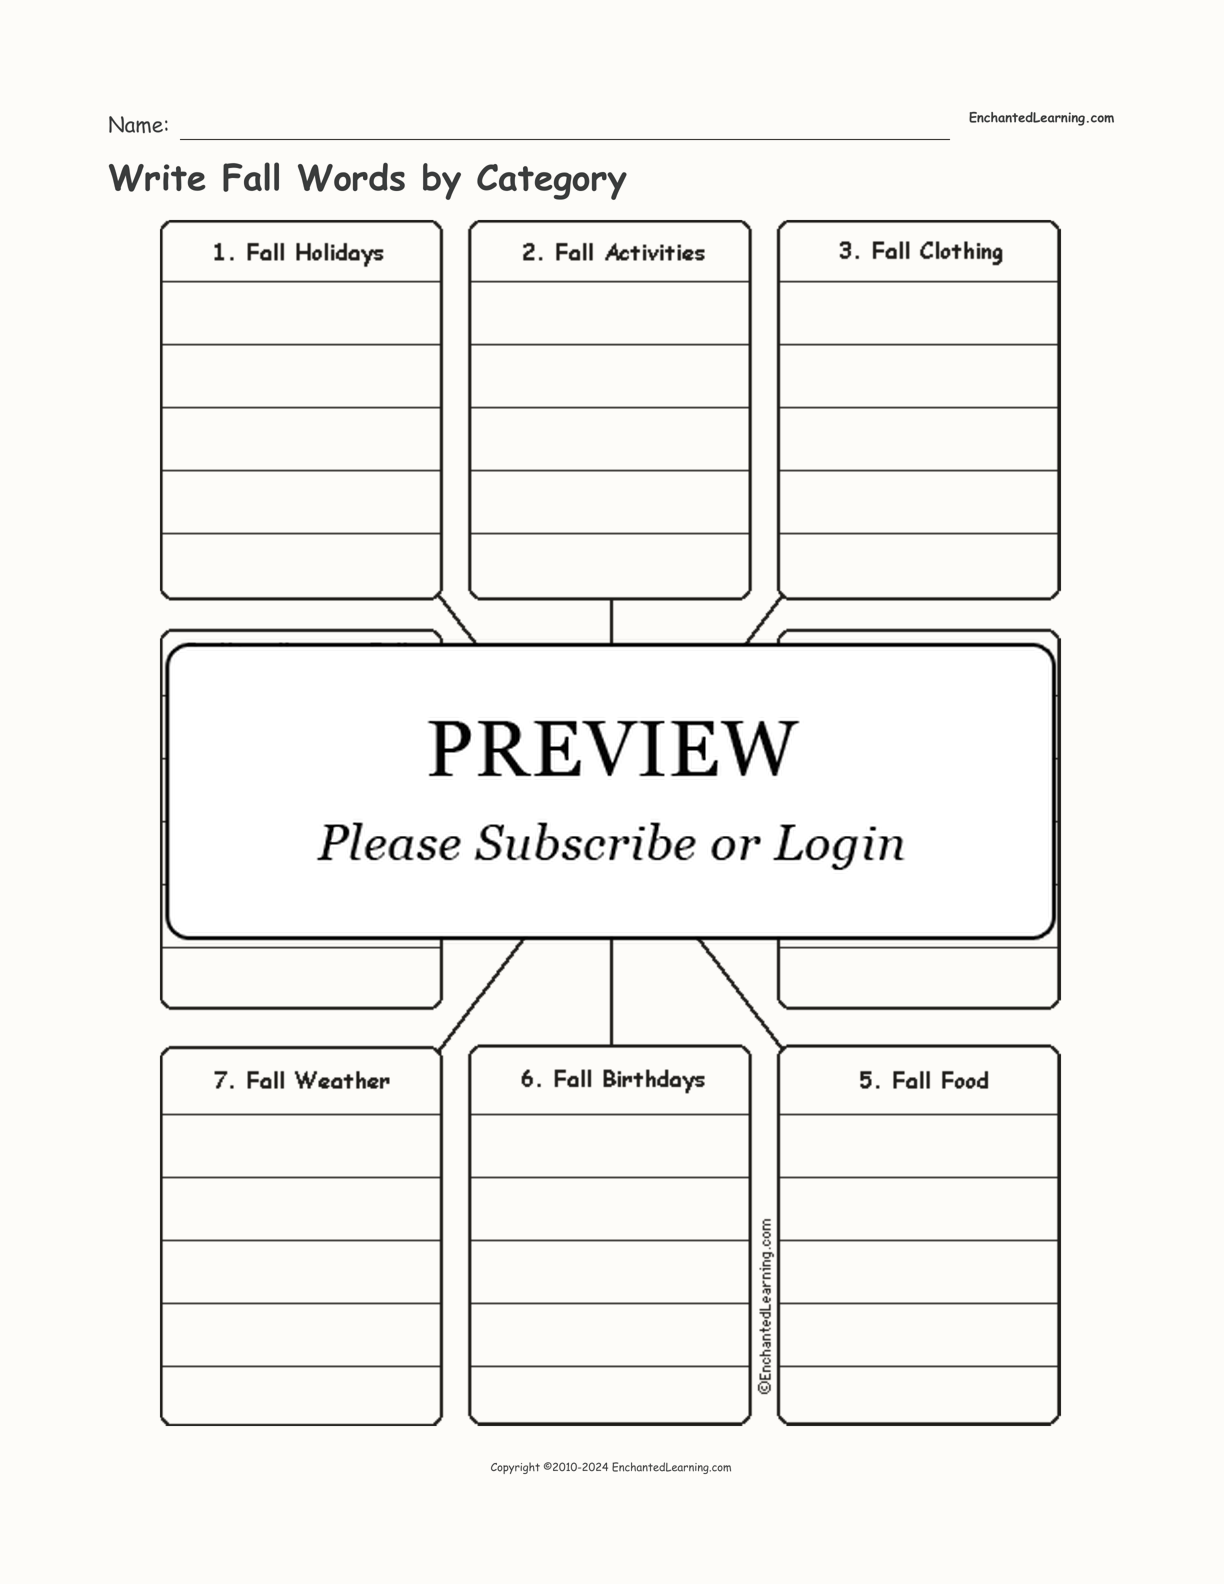 Write Fall Words by Category interactive worksheet page 1